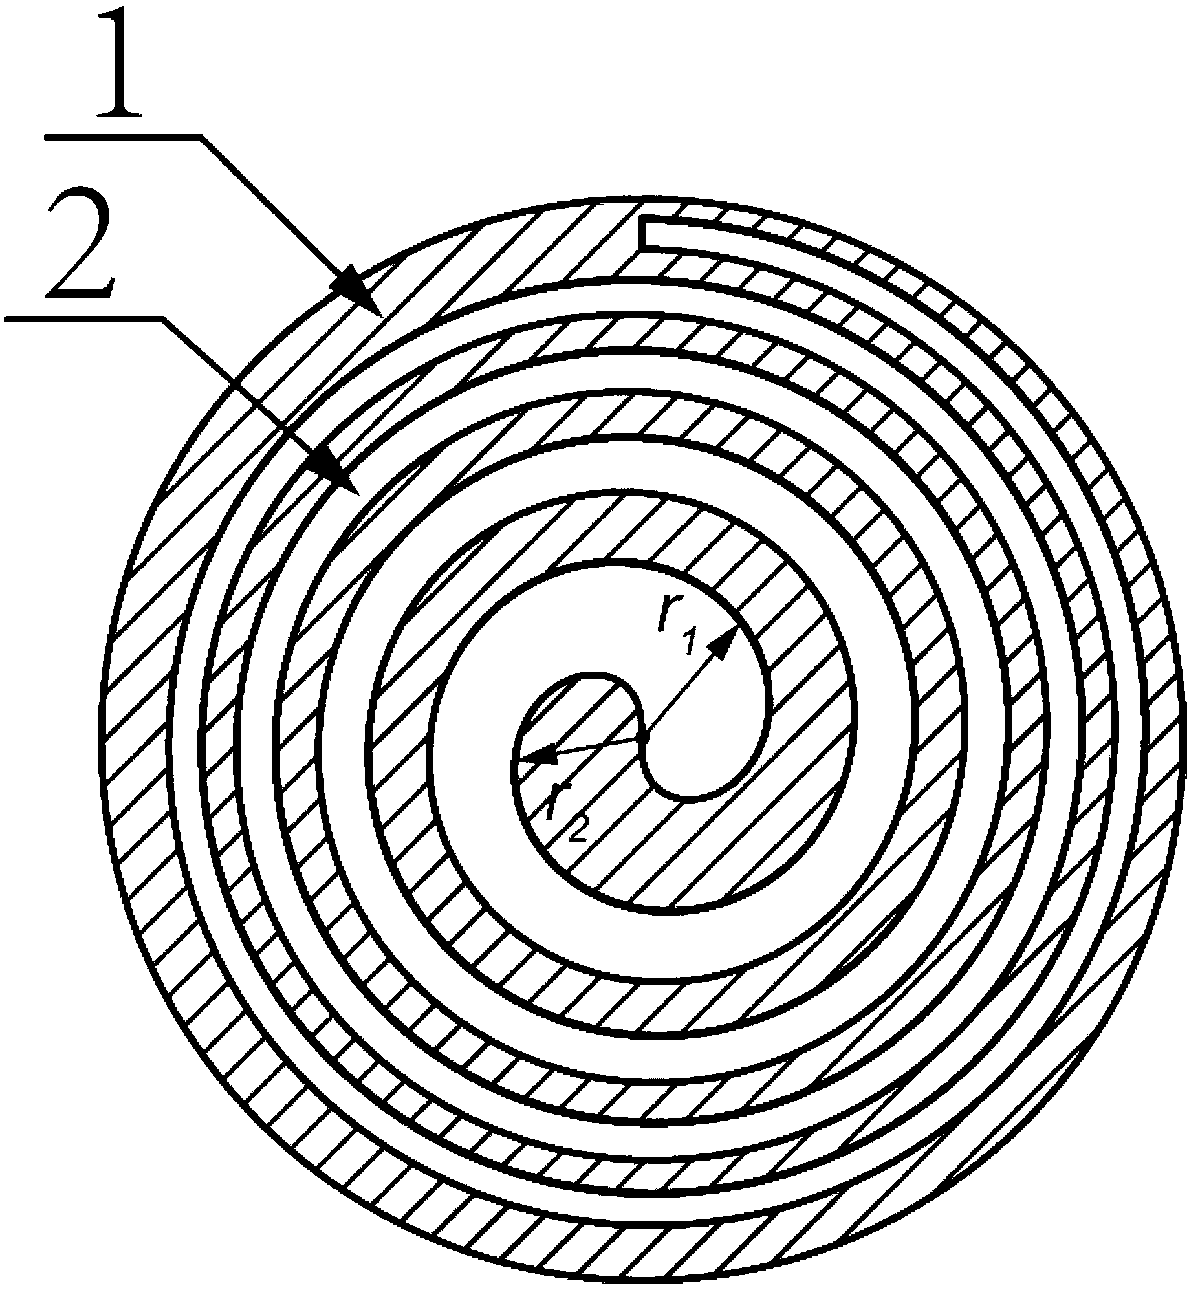 Method of forming sound vortex based on patterned tailoring technology